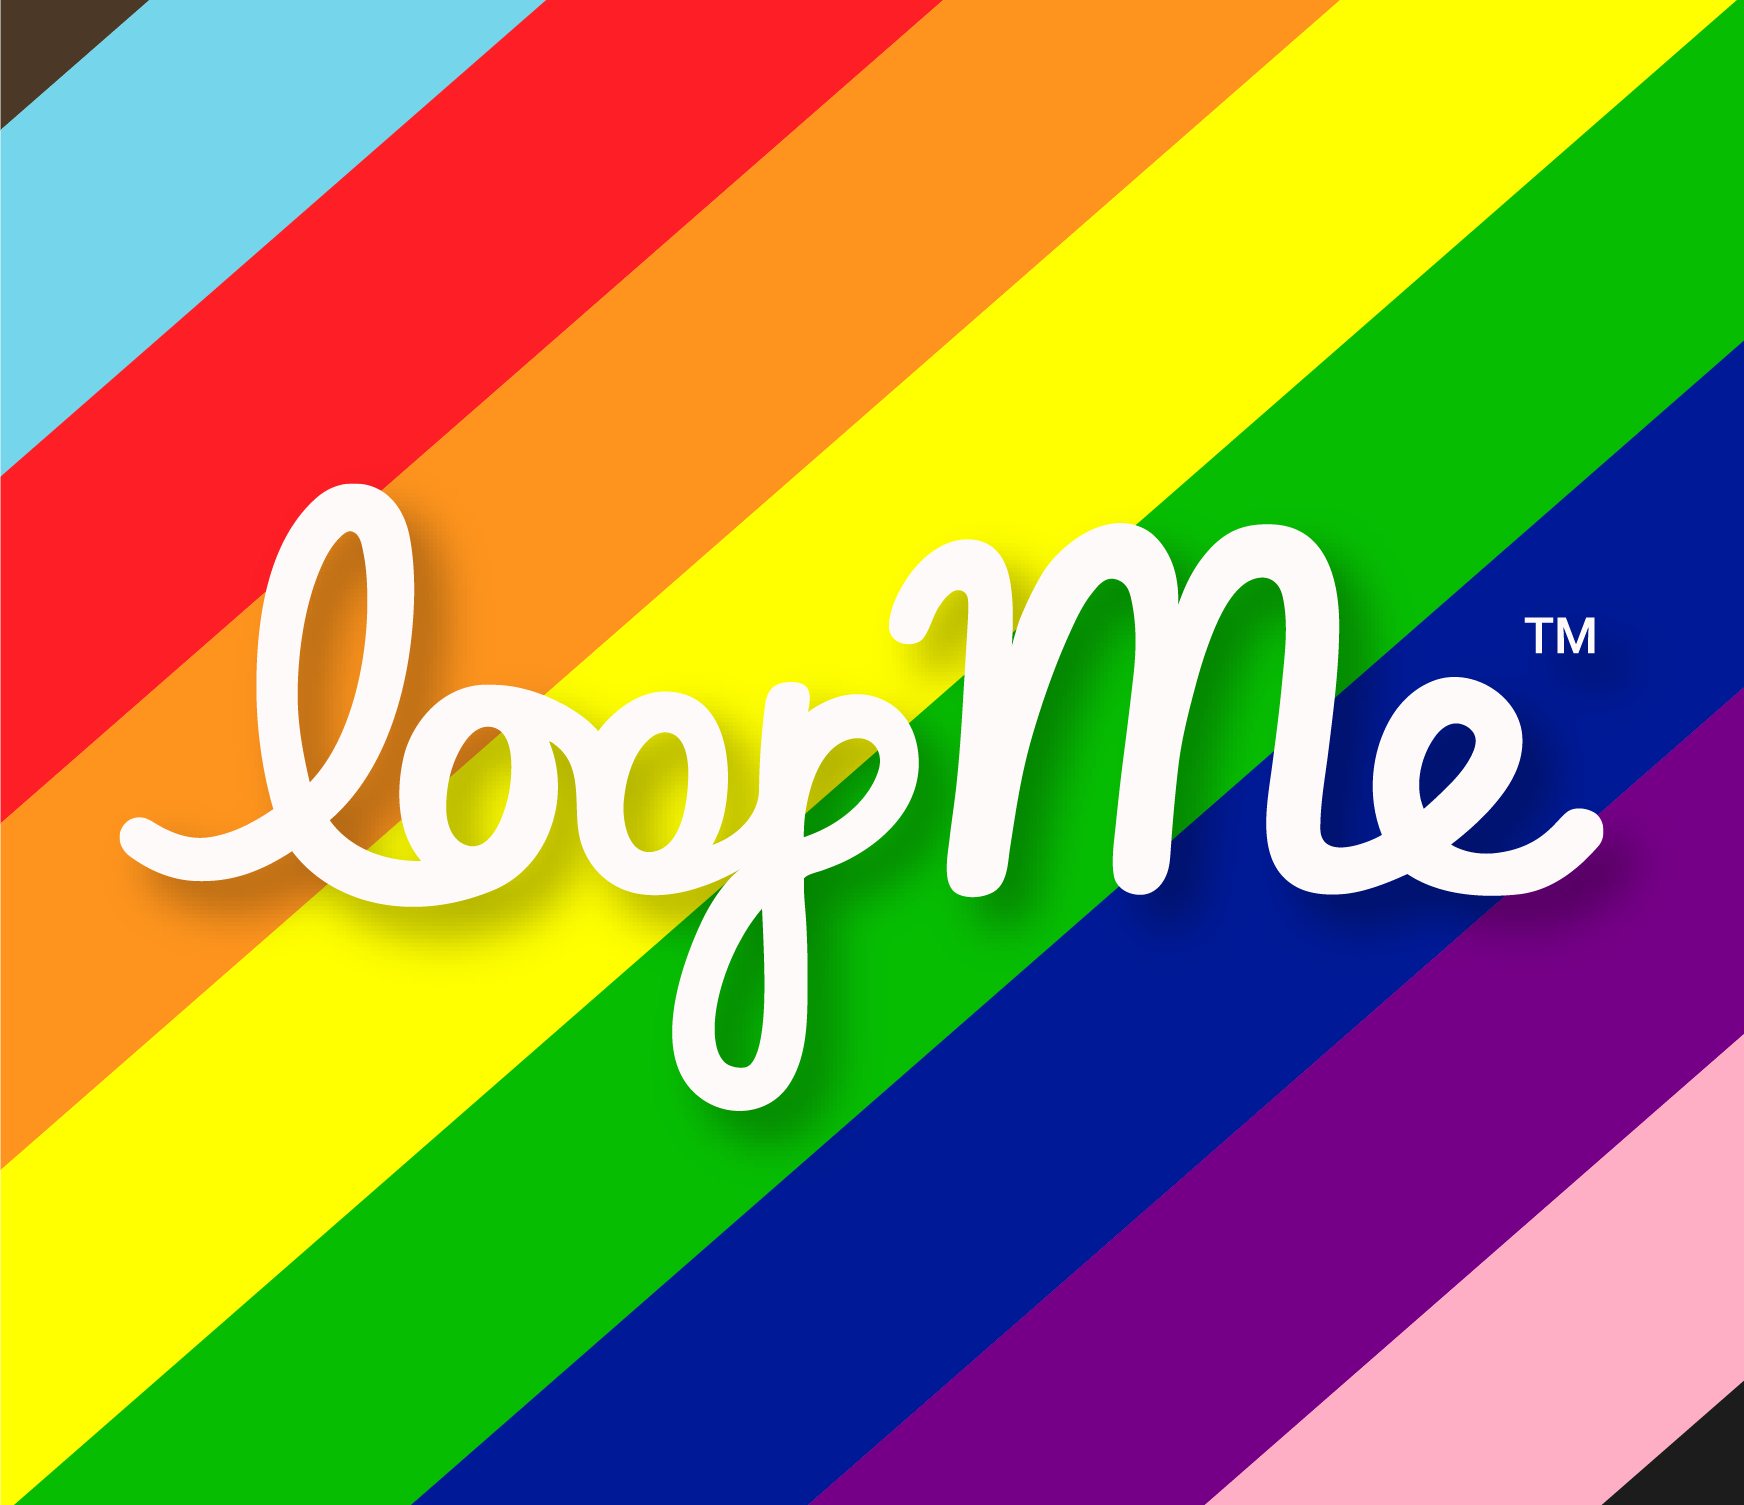 LoopMe logo in white on a background made up of the colours of the progress pride flag